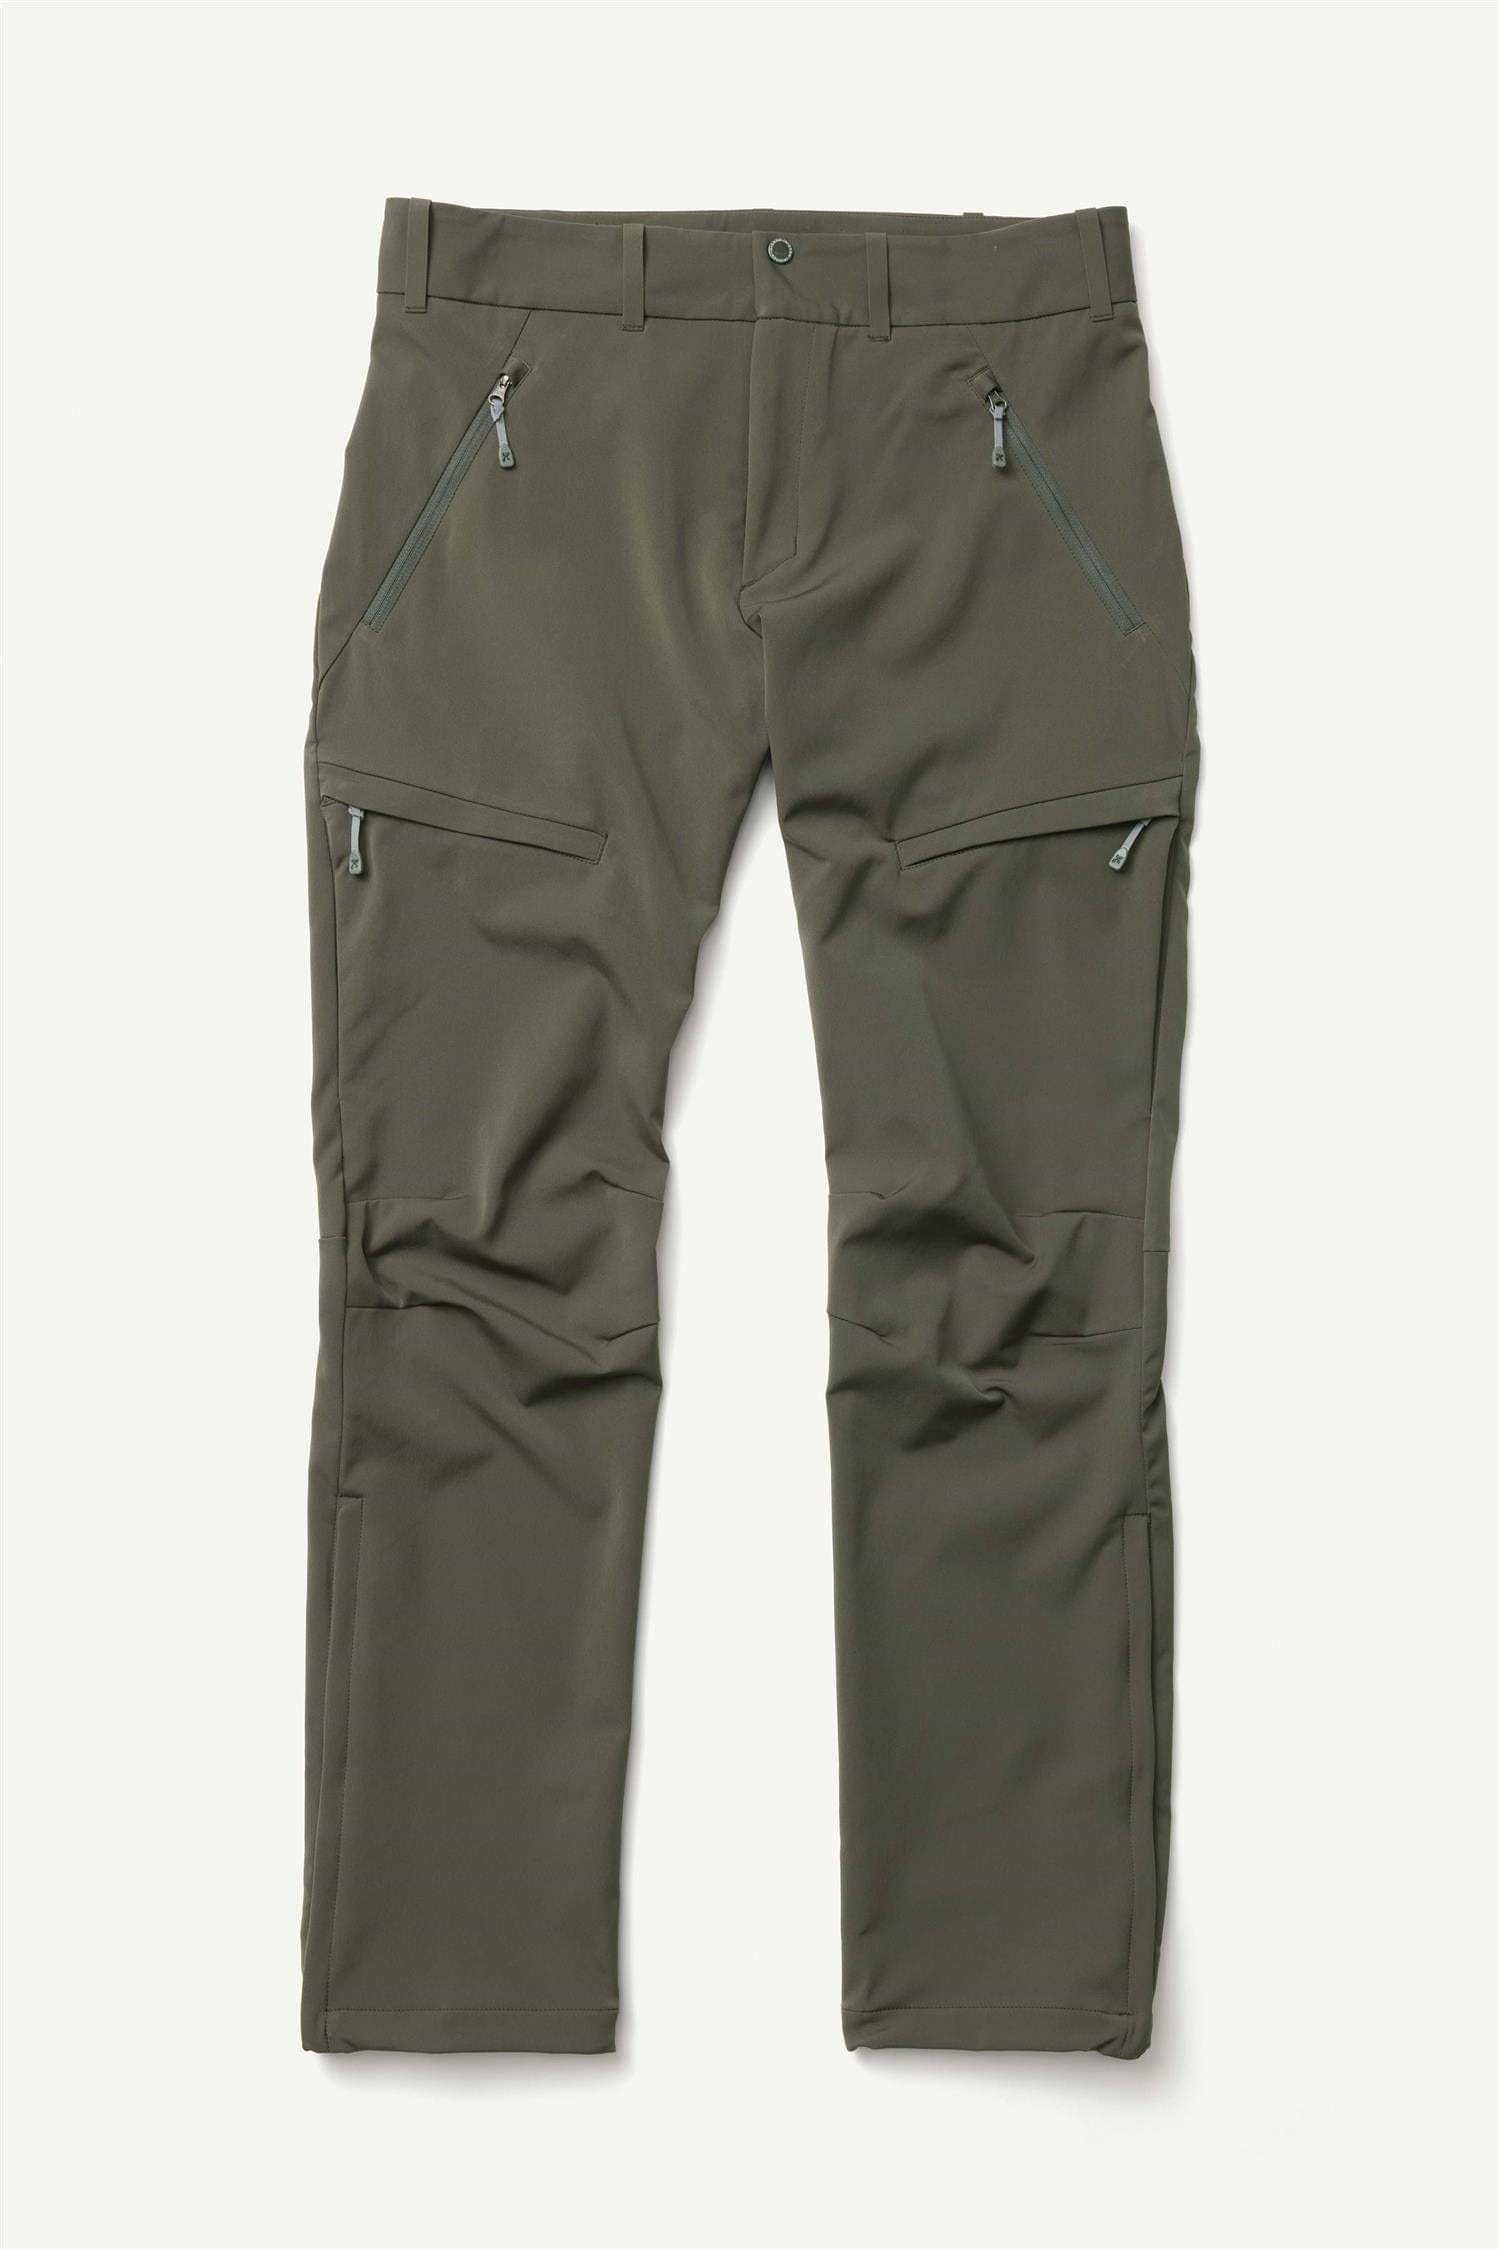 Houdini Trousers M's Motion Top Pants